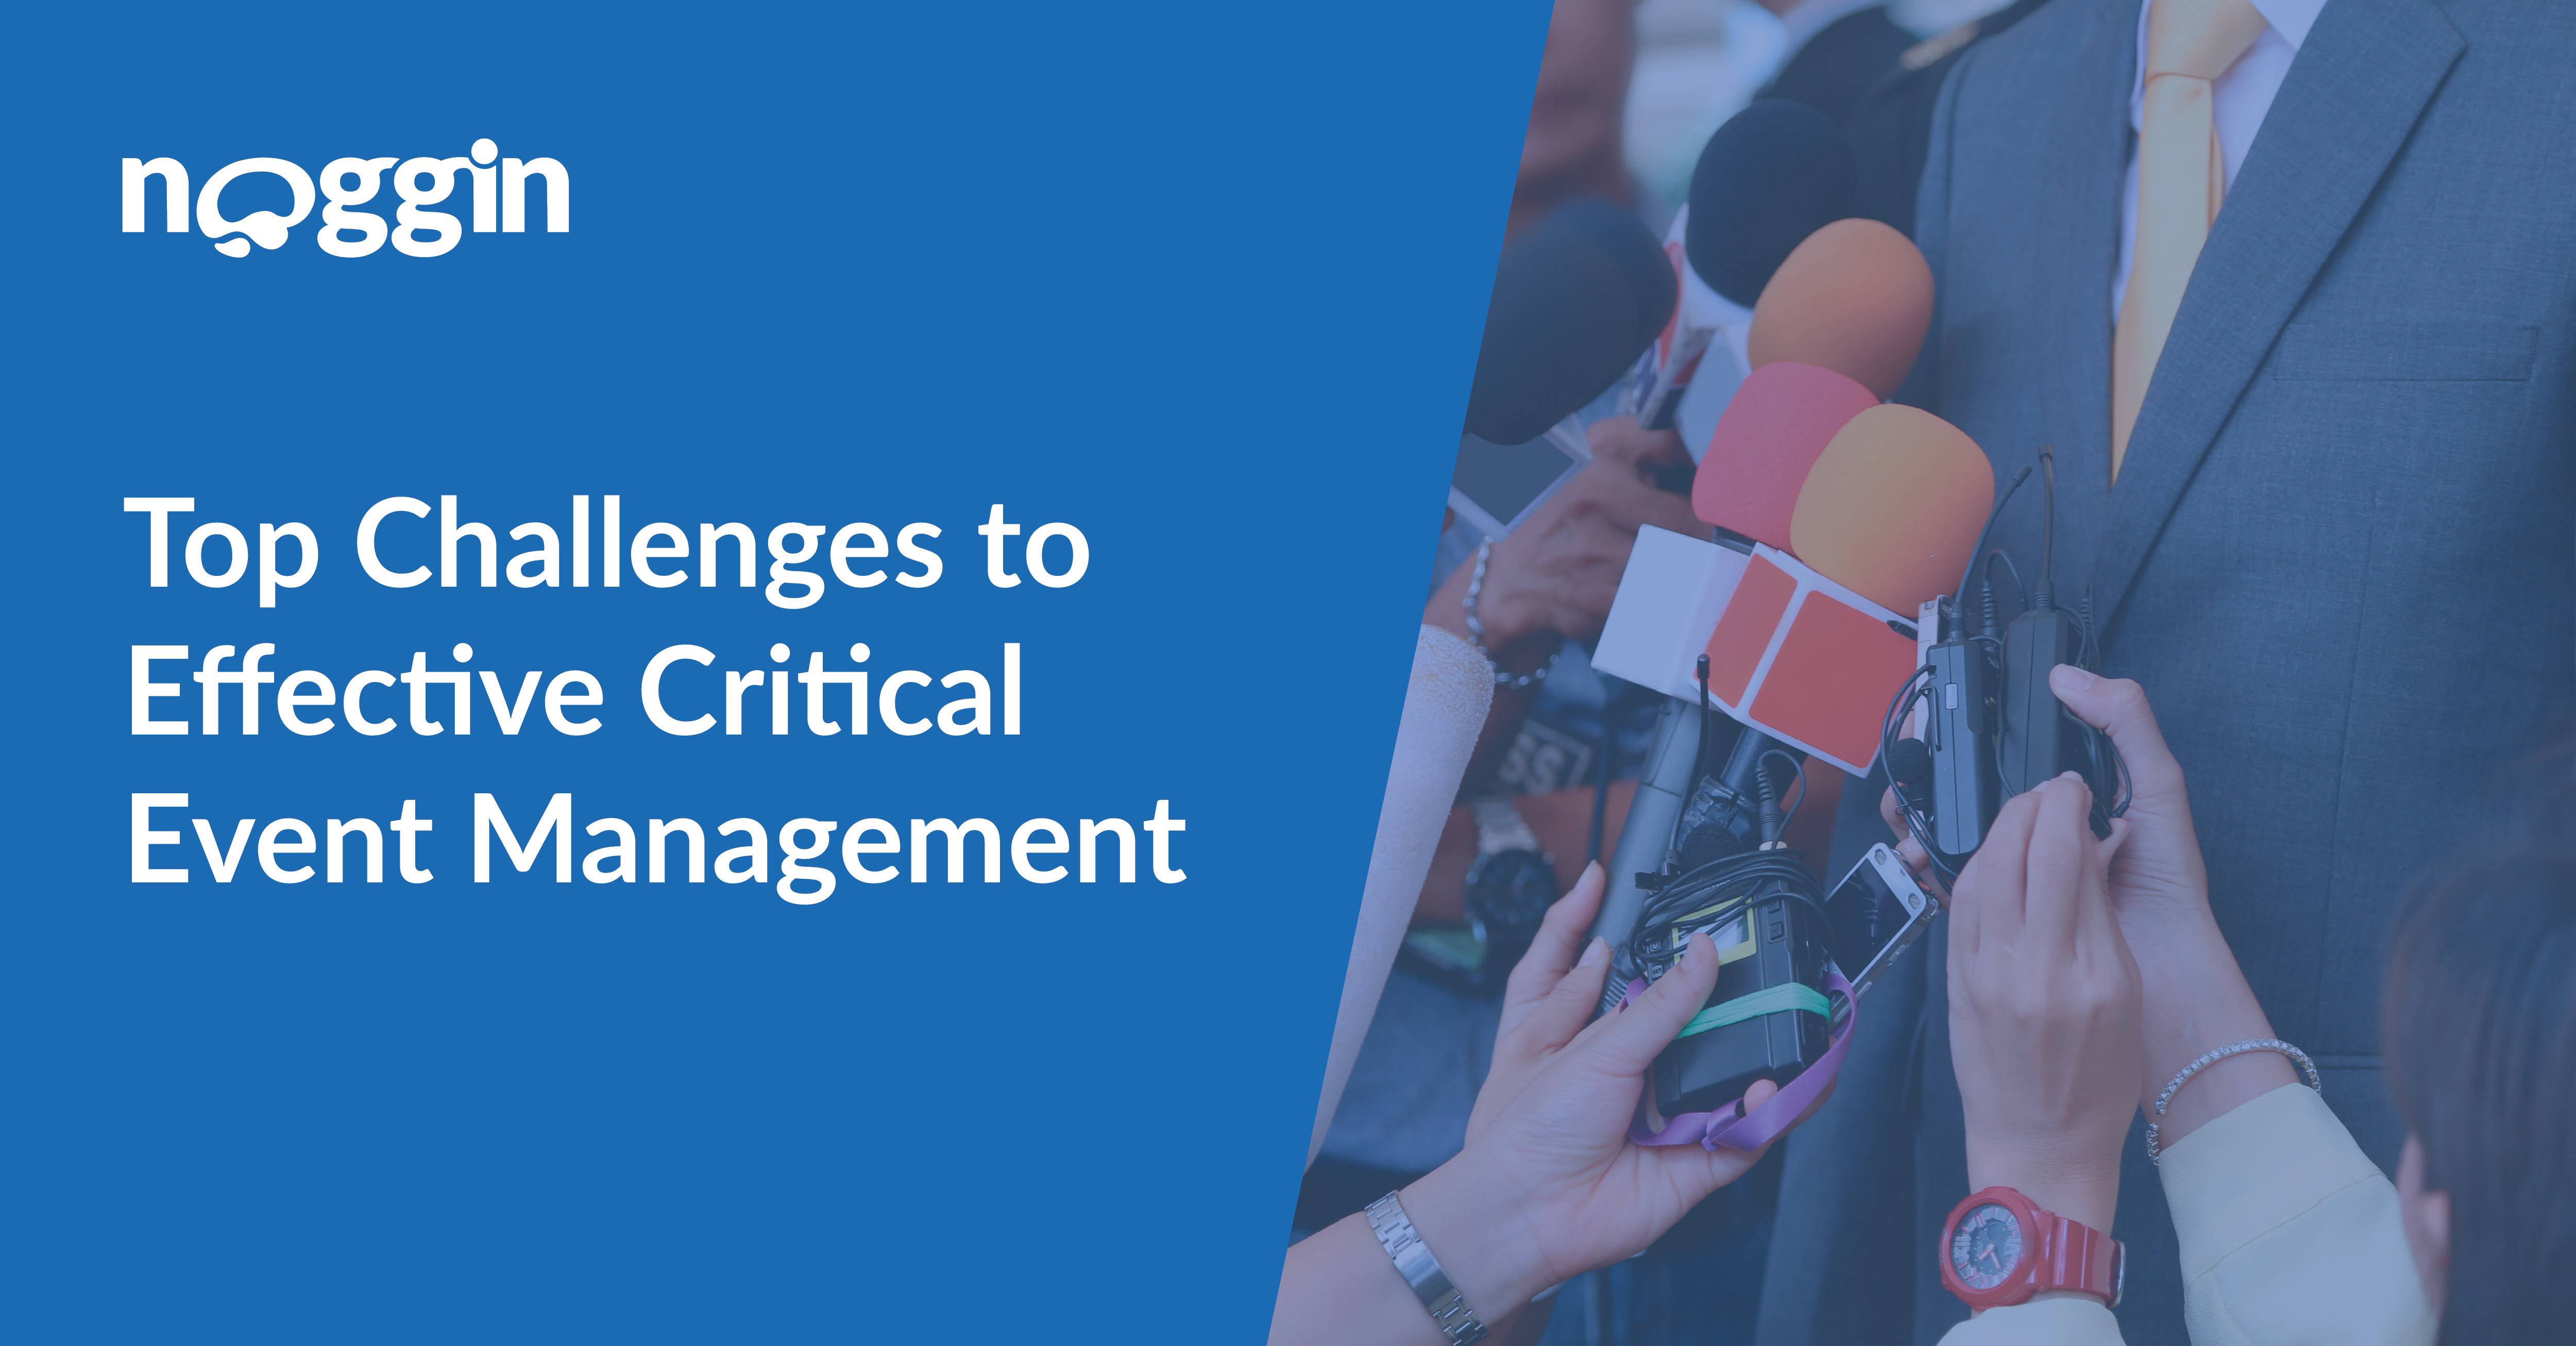 Top Challenges to Effective Critical Event Management and What Your Organisation Can Do to Overcome Them